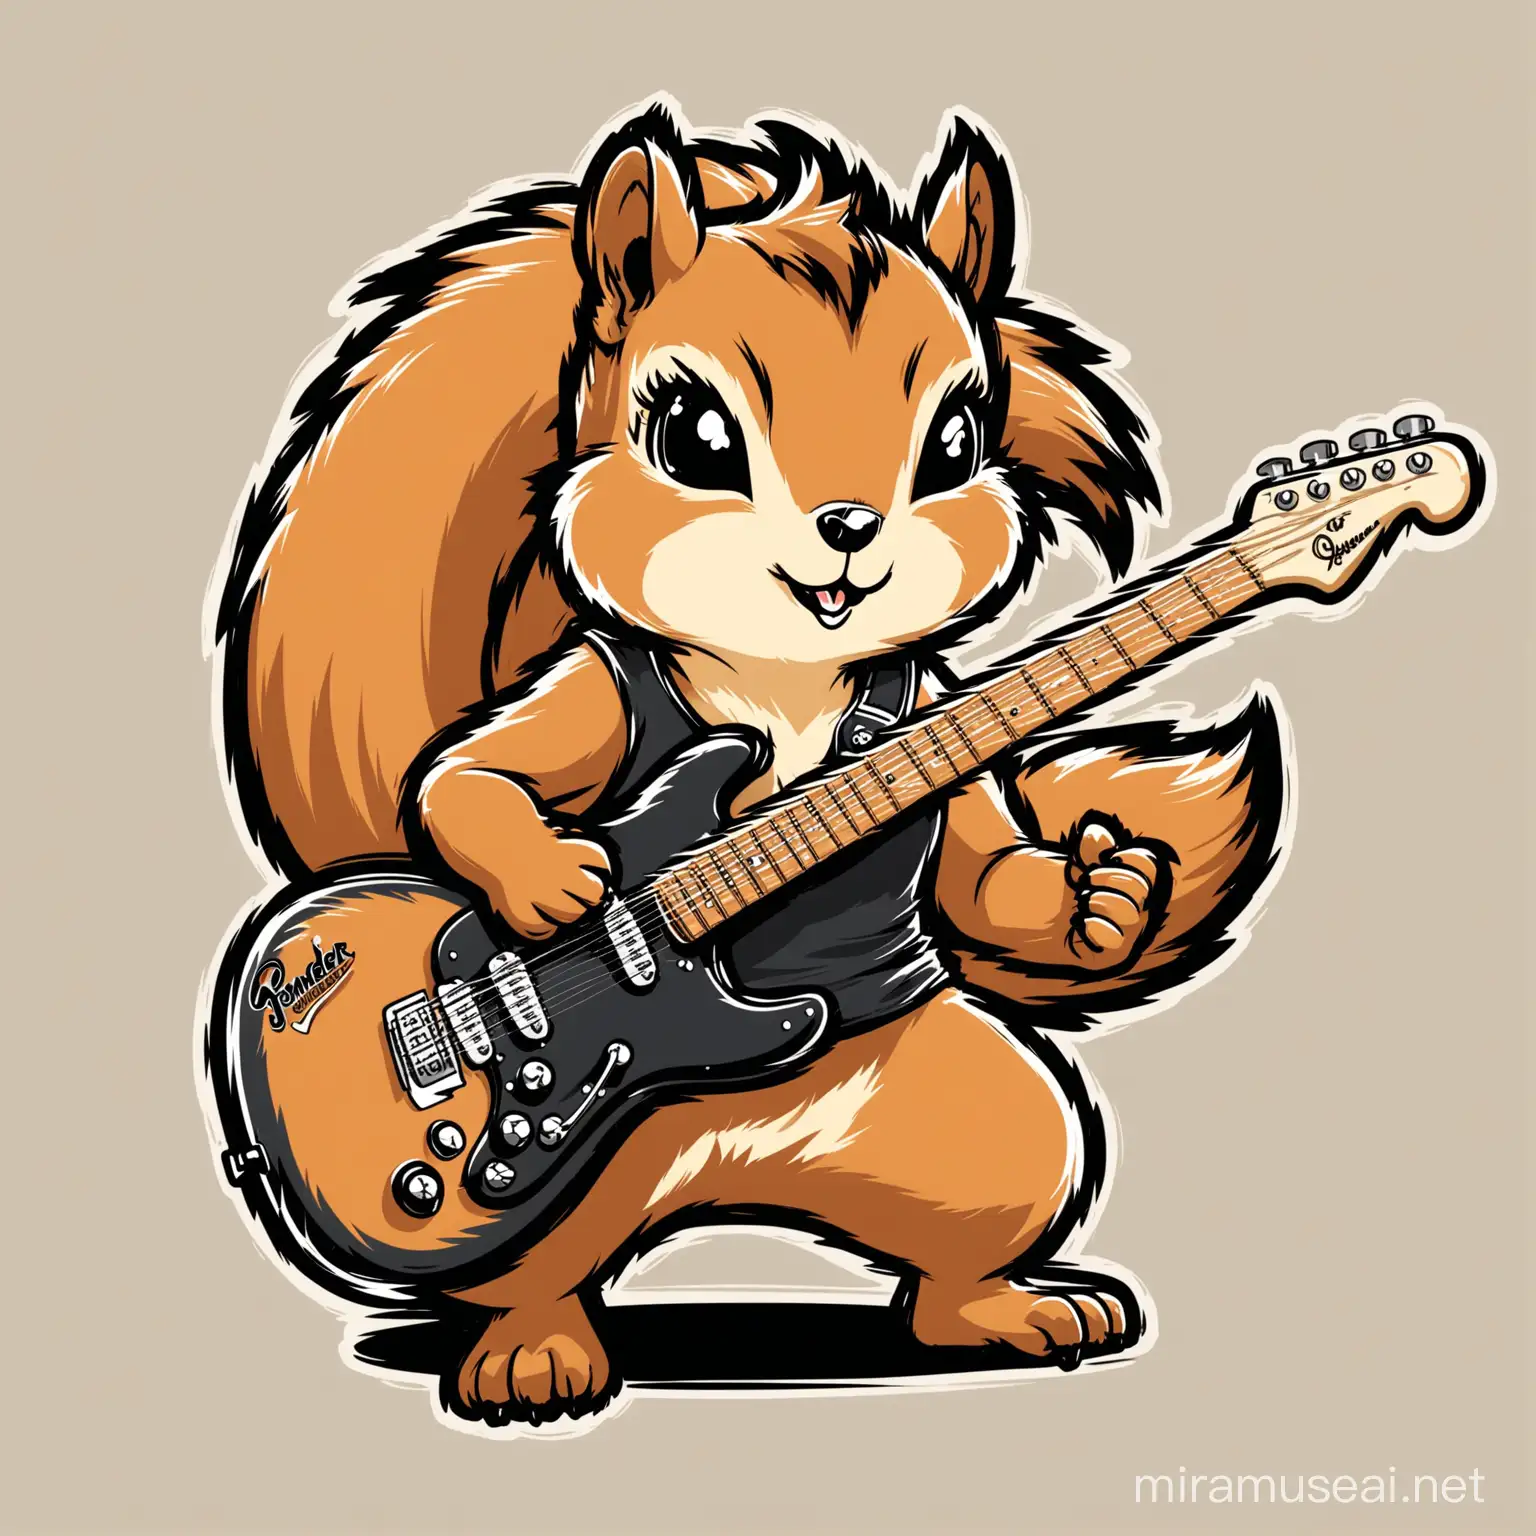 Metalhead Squirrel Jamming on Fender Guitar Queen of the Stone Age Style